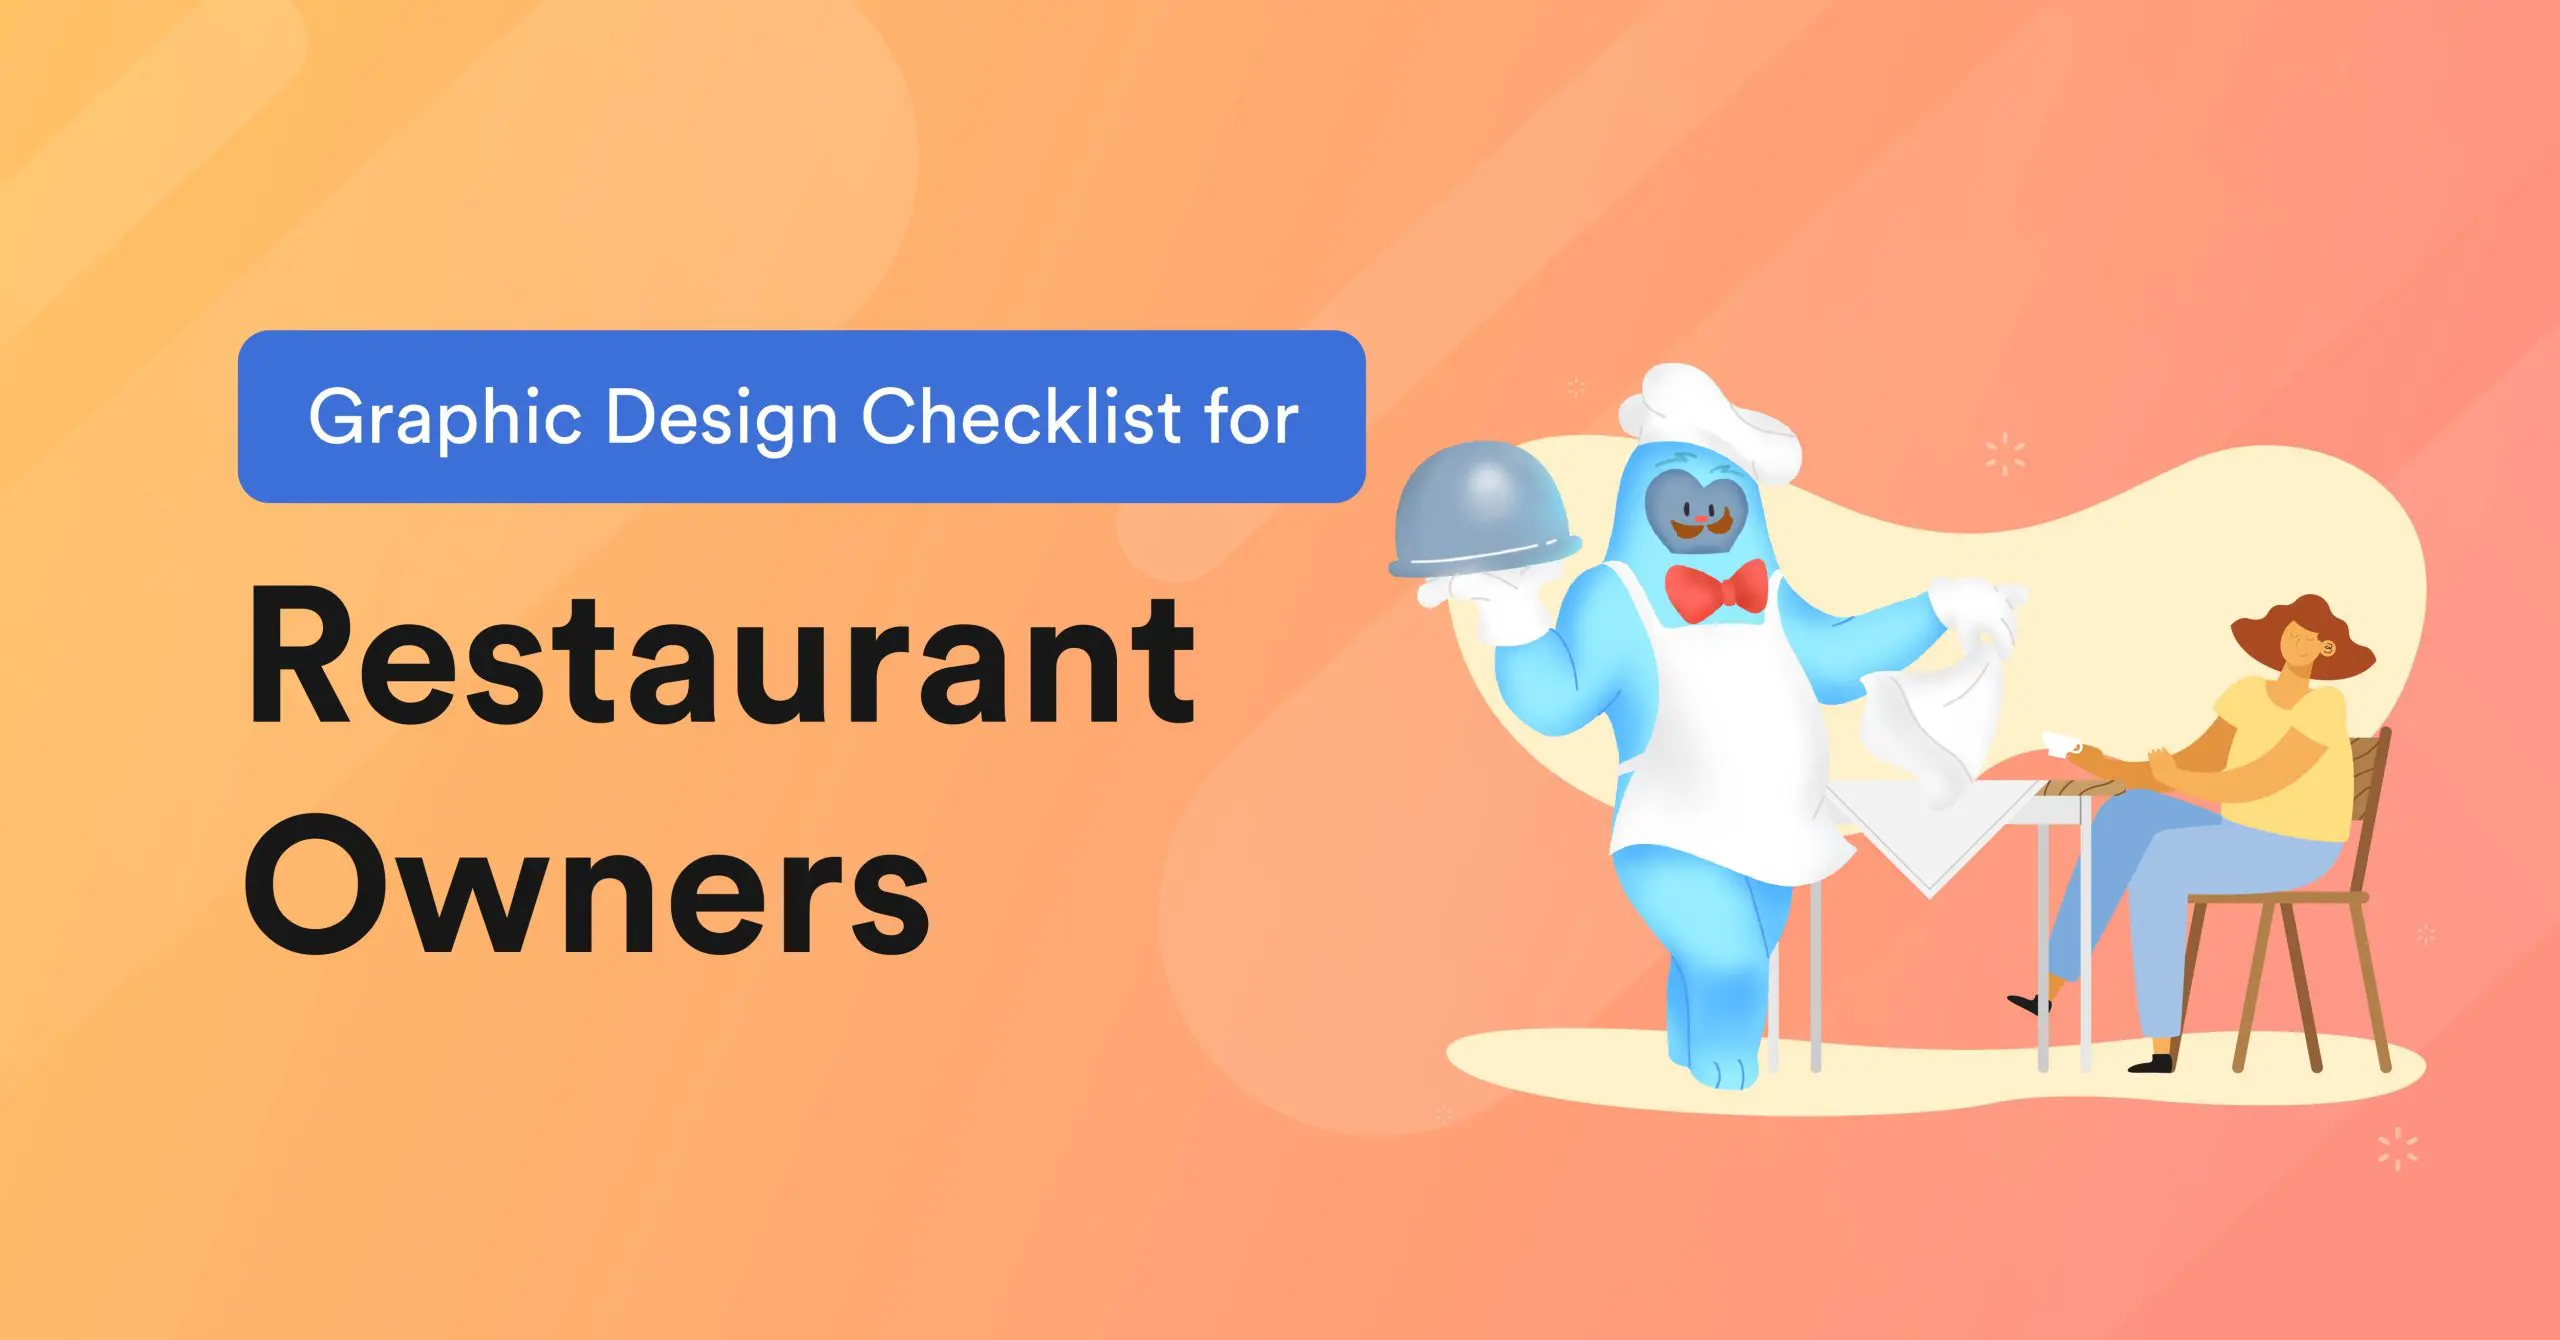 Graphic Design Checklist for Restaurant Owners